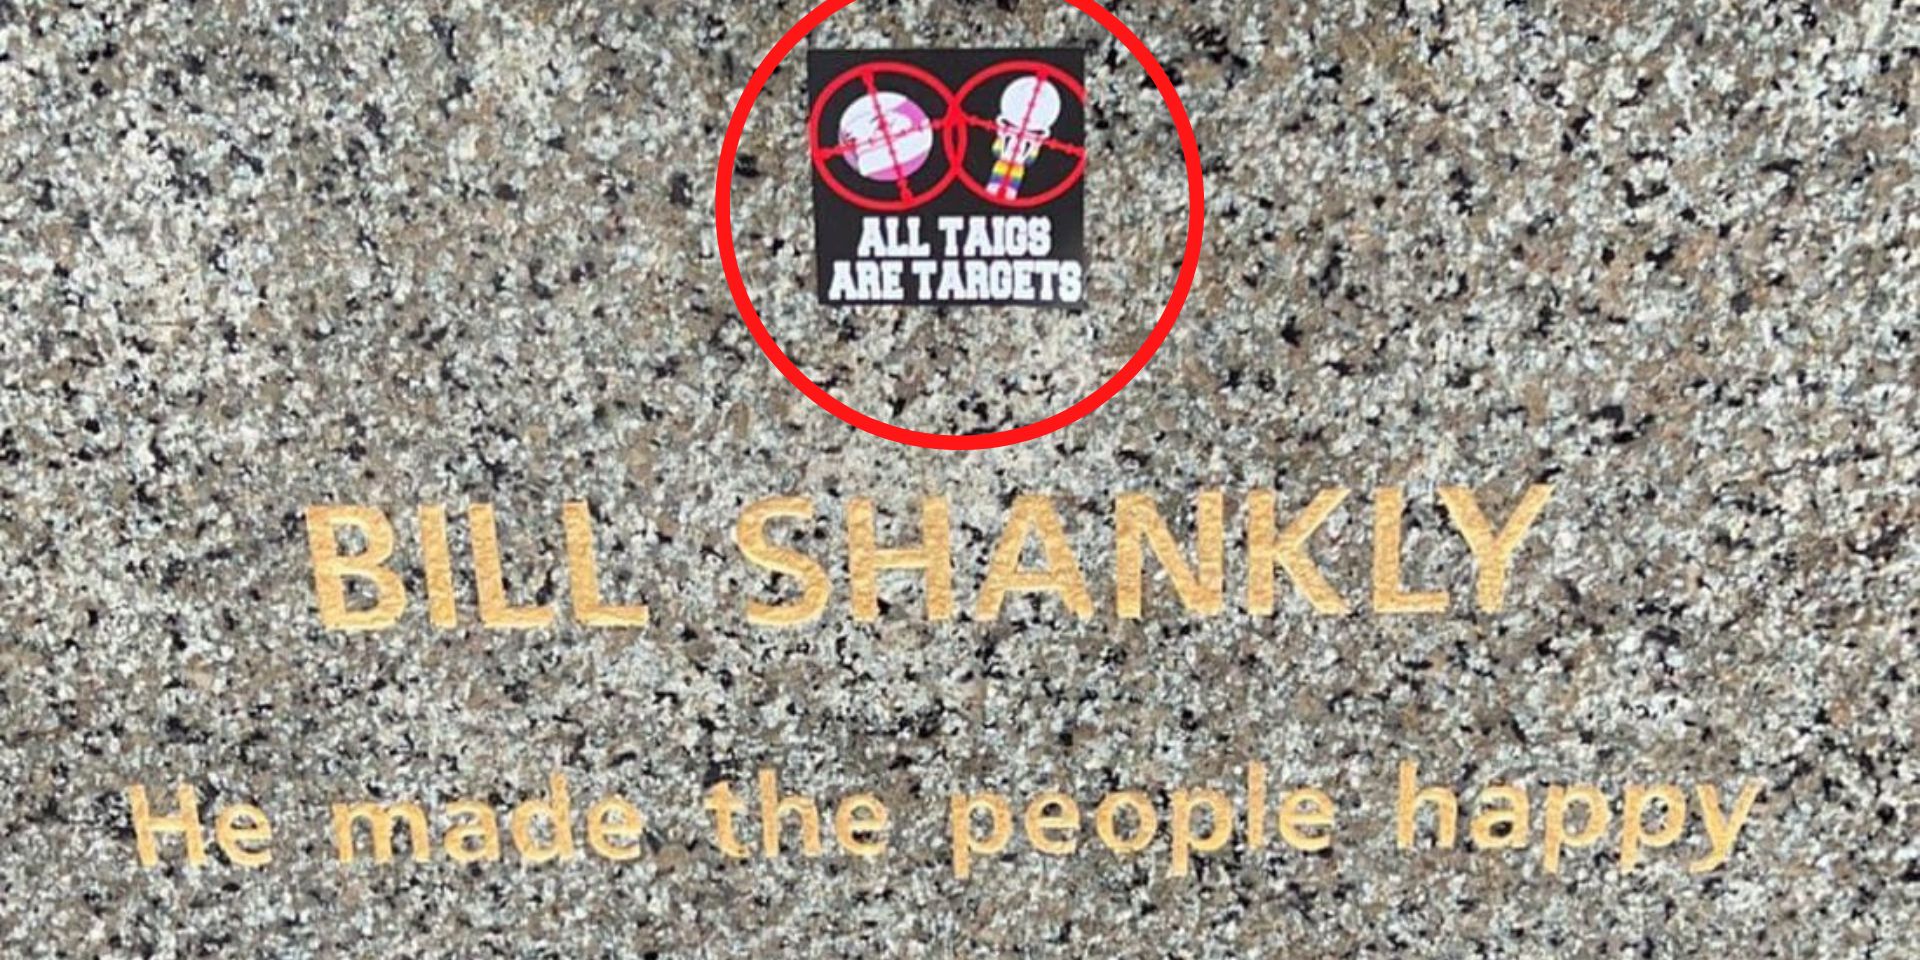 (Image) Horrible sectarian sticker left on Bill Shankly statue outside Anfield by Rangers fans